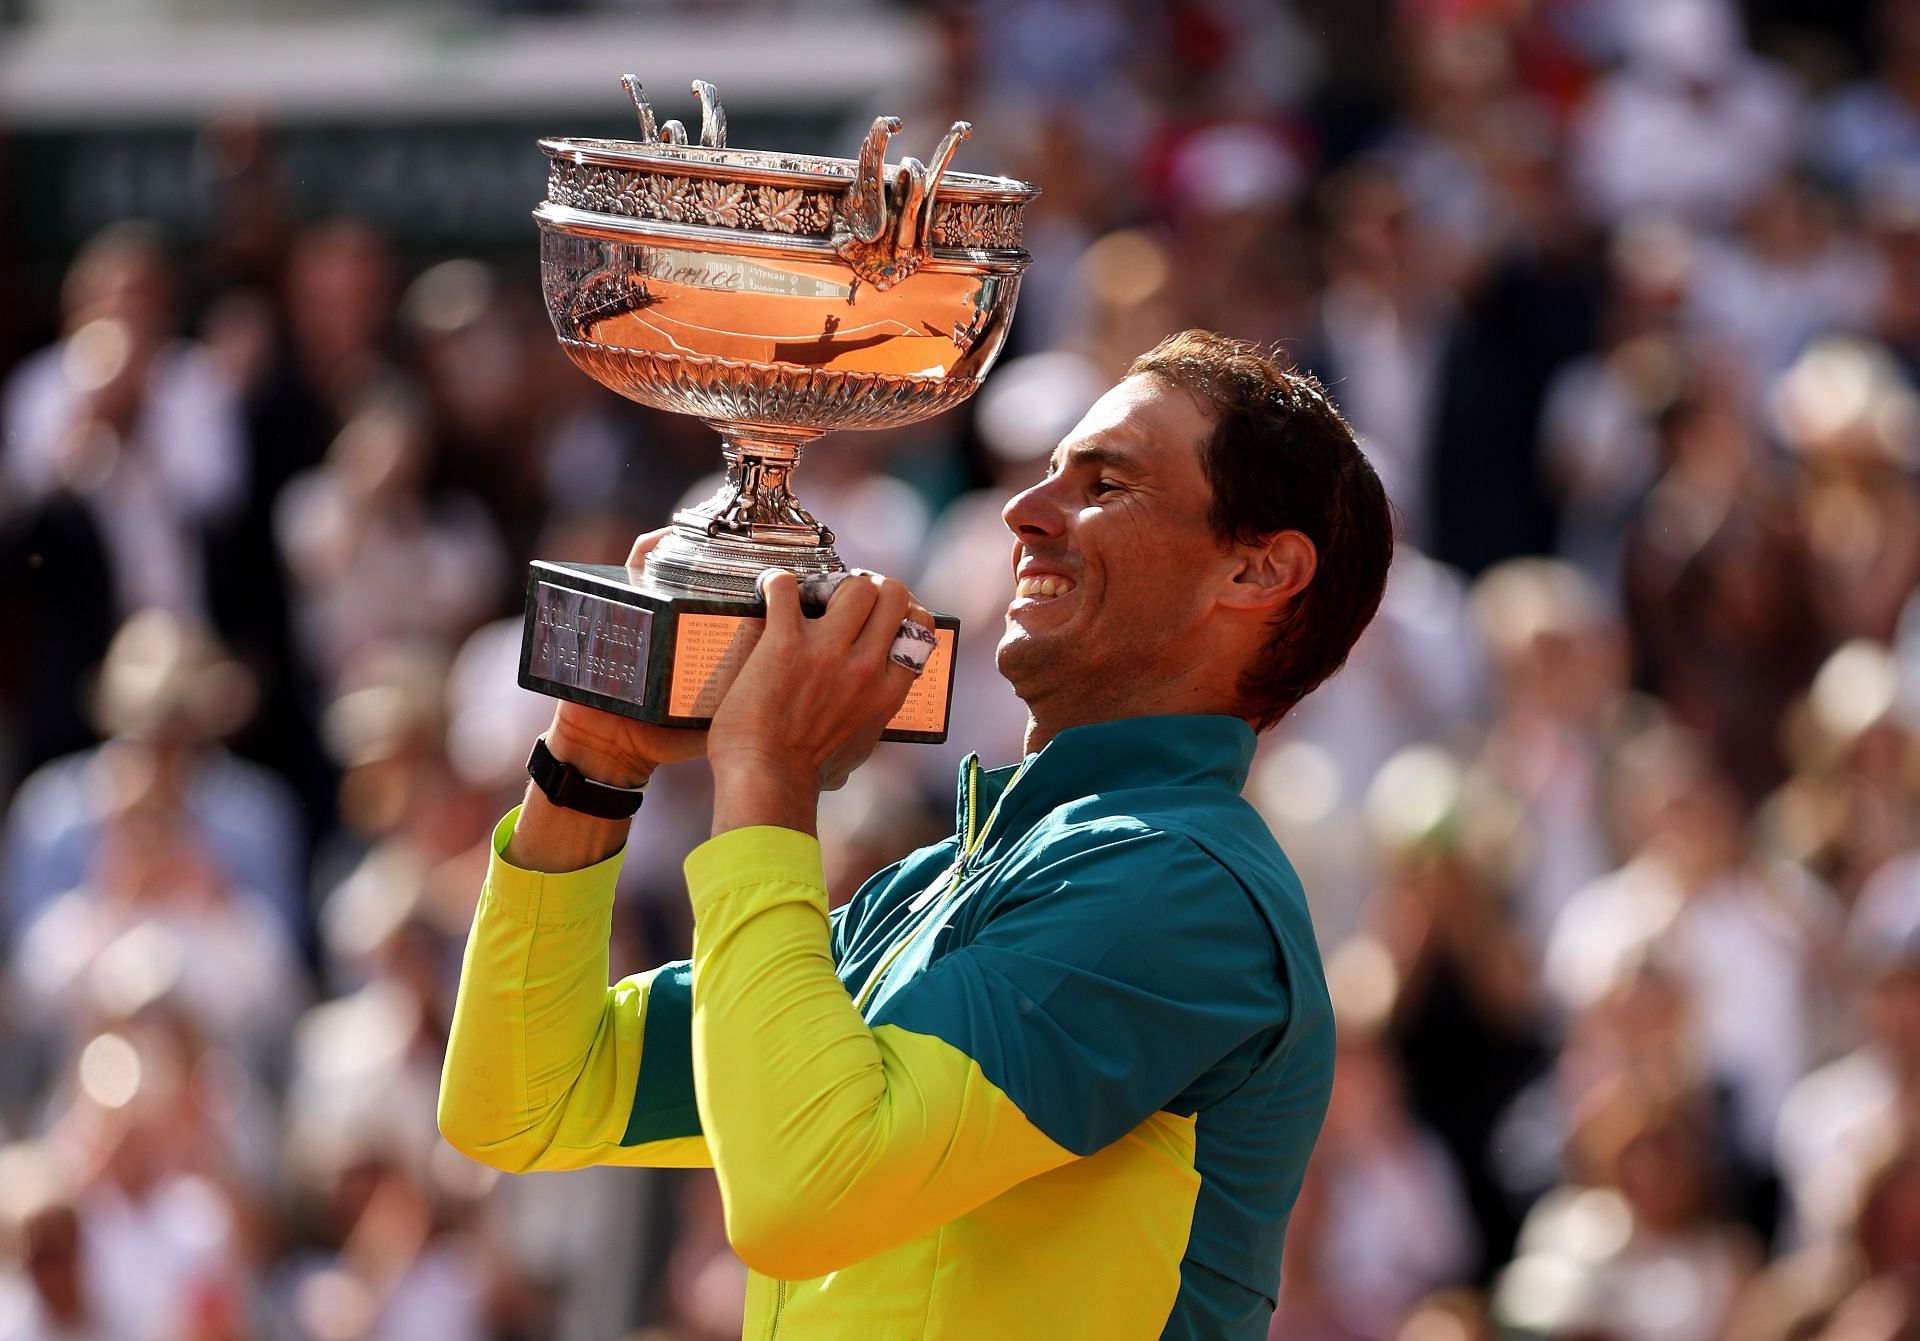 The Spanish bull lifts the 2022 French Open trophy